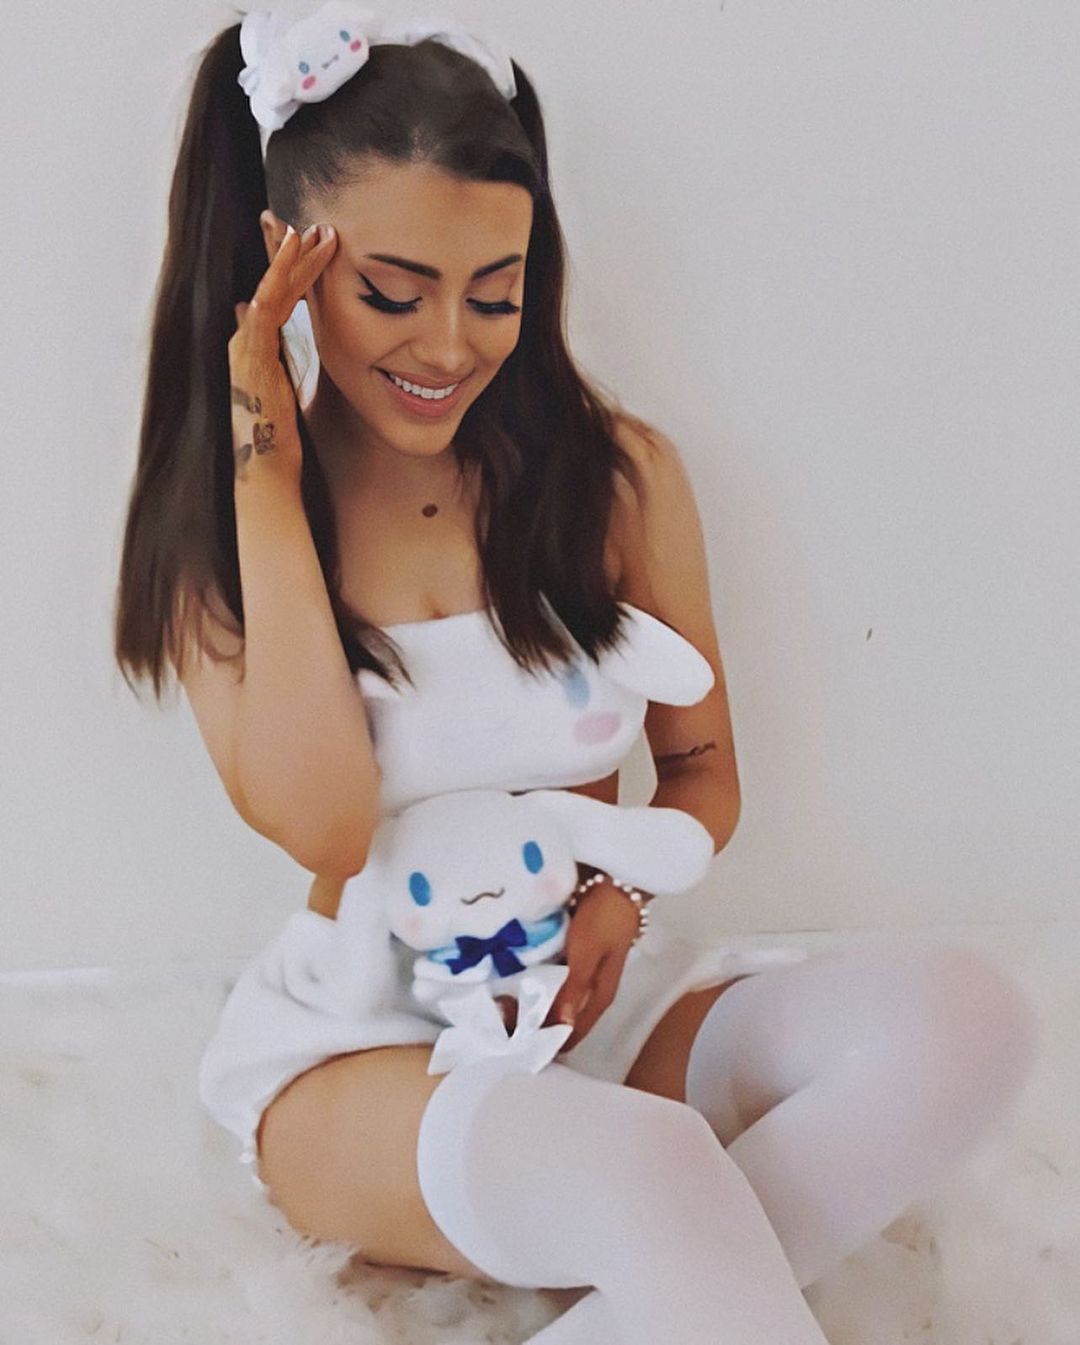 Paige Niemann wearing a white dress holding a soft toy